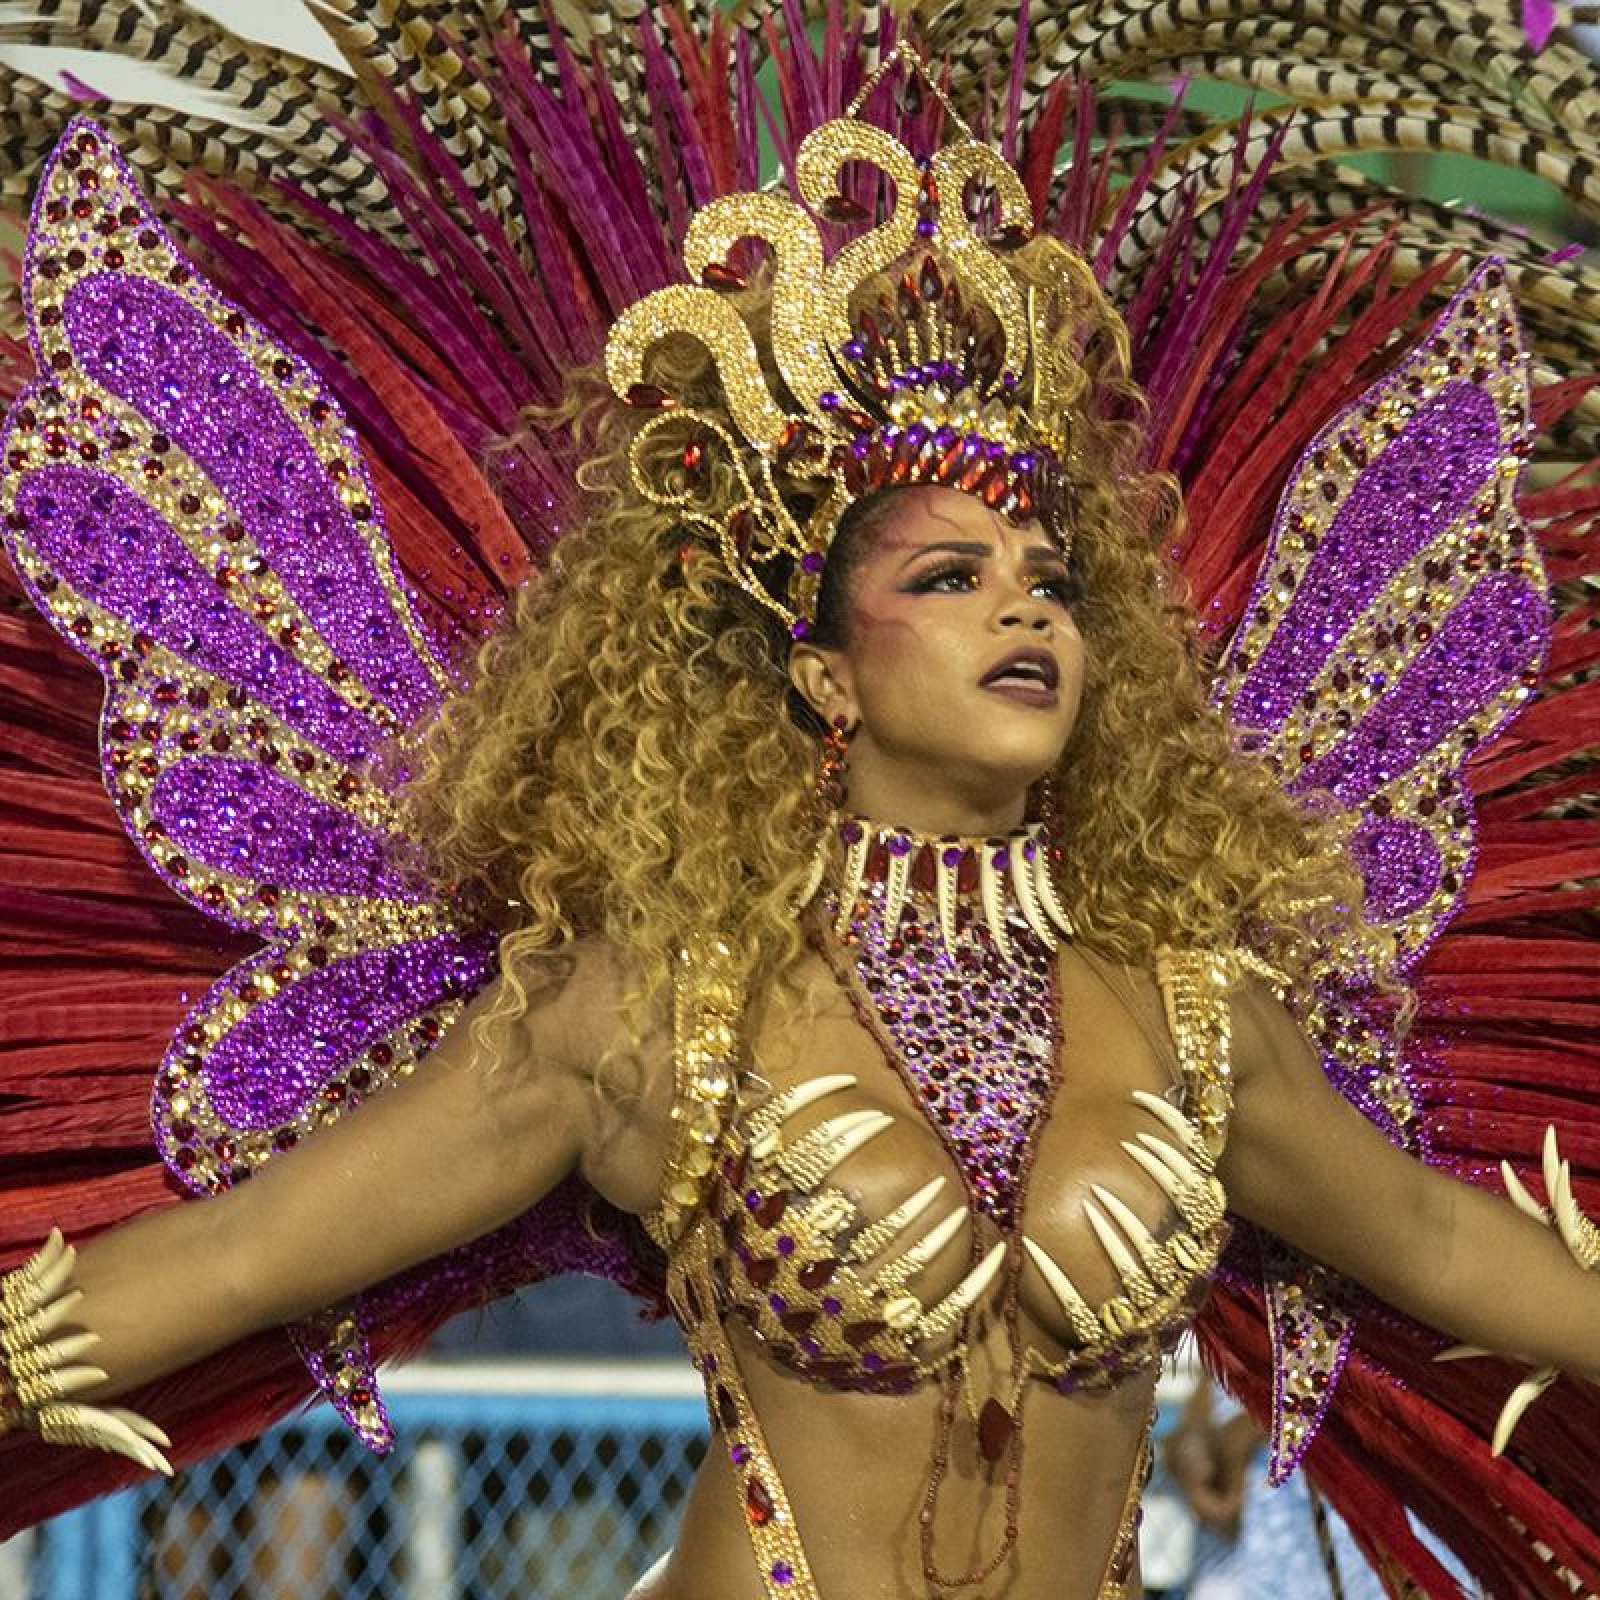 Rio De Janeiro Carnival 19 Parades Part 2 Spectacular Photos Of The Floats Dancers And Costumes